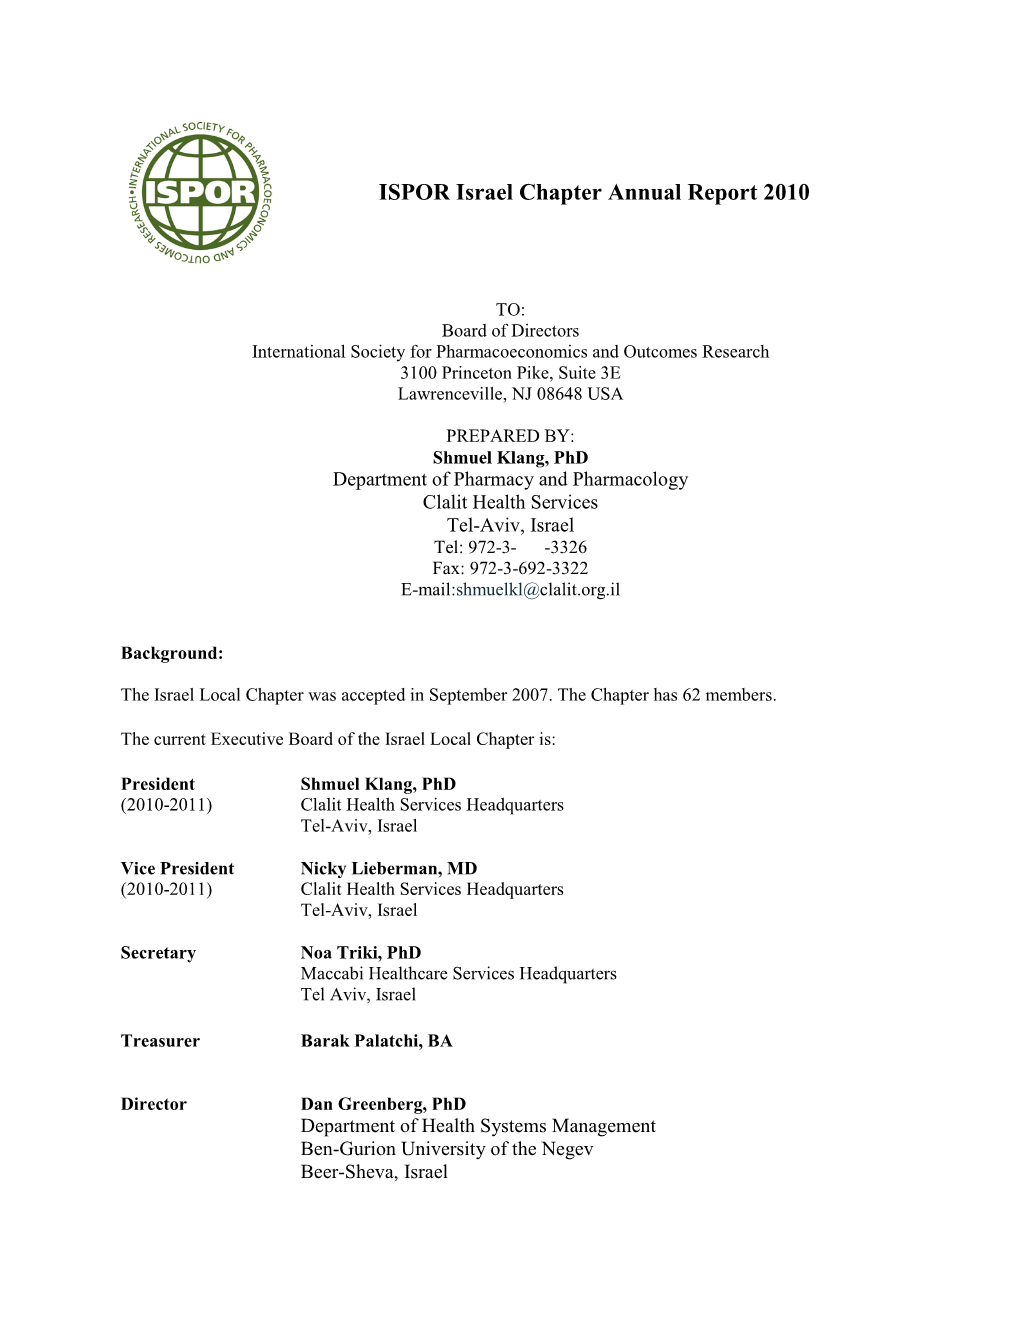 ISPOR Israel Chapter Annual Report 2010